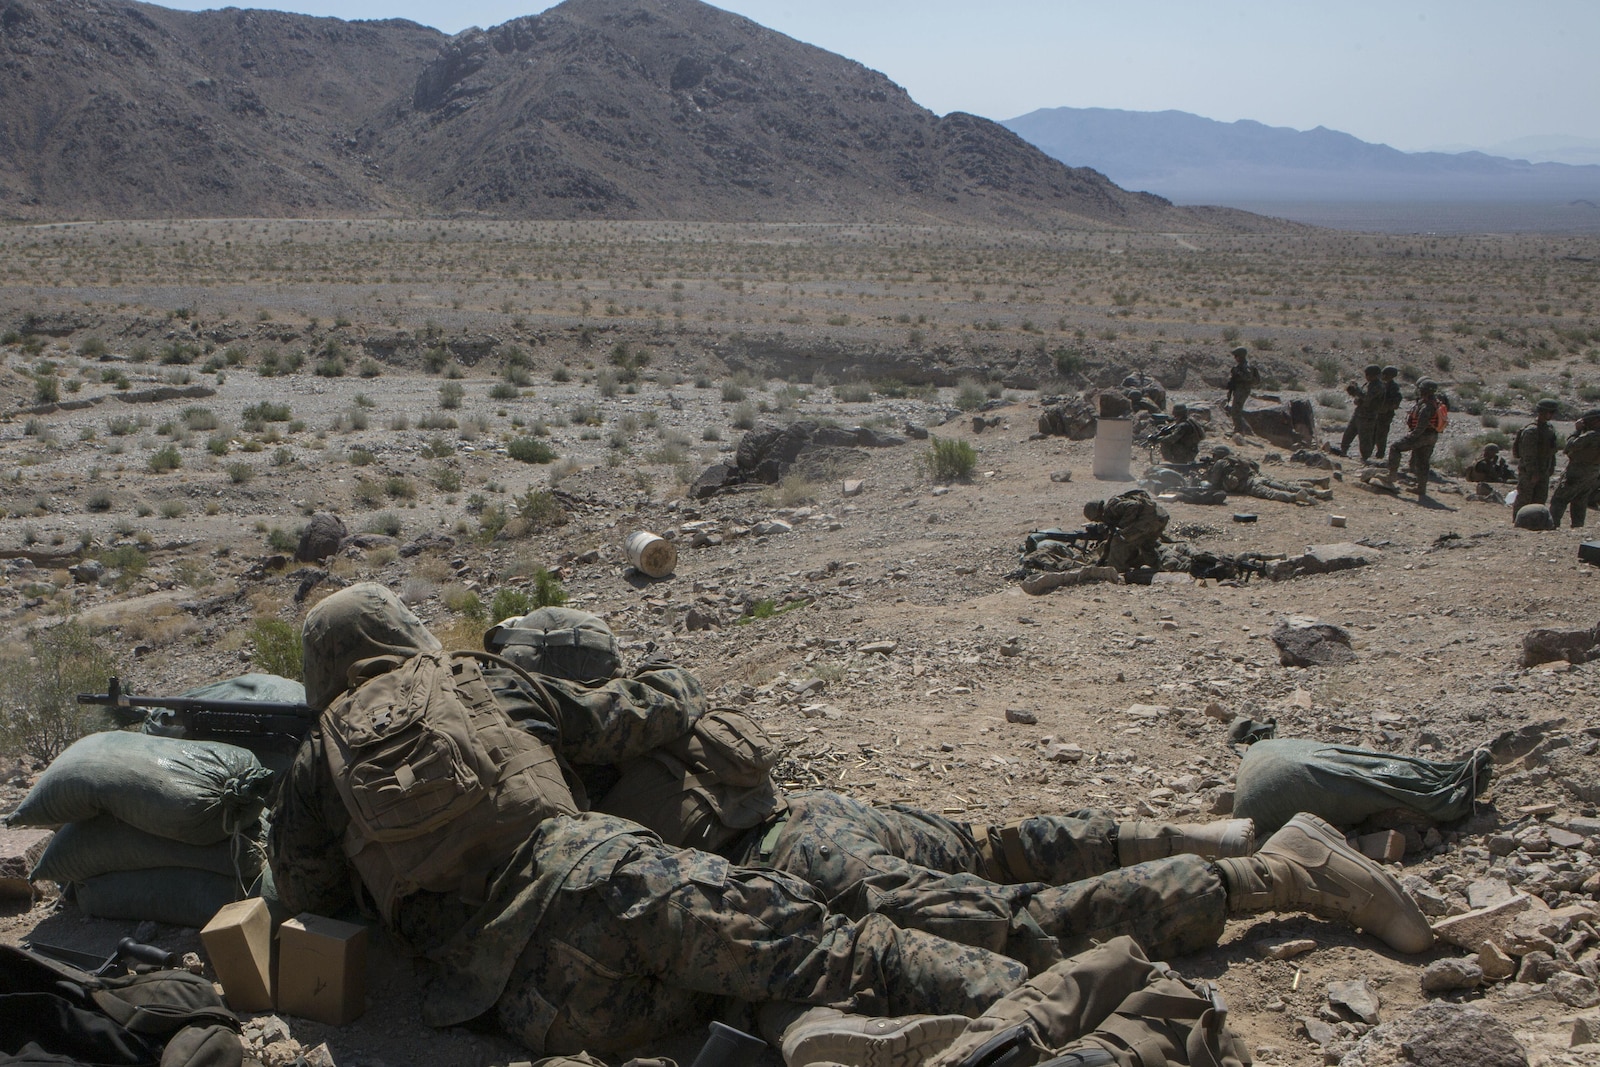 U.S. Marines with Golf Company, 2nd Battalion, 25th Marines, 4th Marine Division, Marine Forces Reserve, fire on range 400 as part Integrated Training Exercise 4-17 at Camp Wilson, Twentynine Palms, California on June 18, 2017. ITX is the largest annual Marine Forces Reserve training exercise, bringing together over 5,000 Marines from across the United States to prepare battalion and squadron-sized units for combat, under the most realistic conditions possible.(U.S. Marine Corps photo by Lance Cpl. Imari J. Dubose)